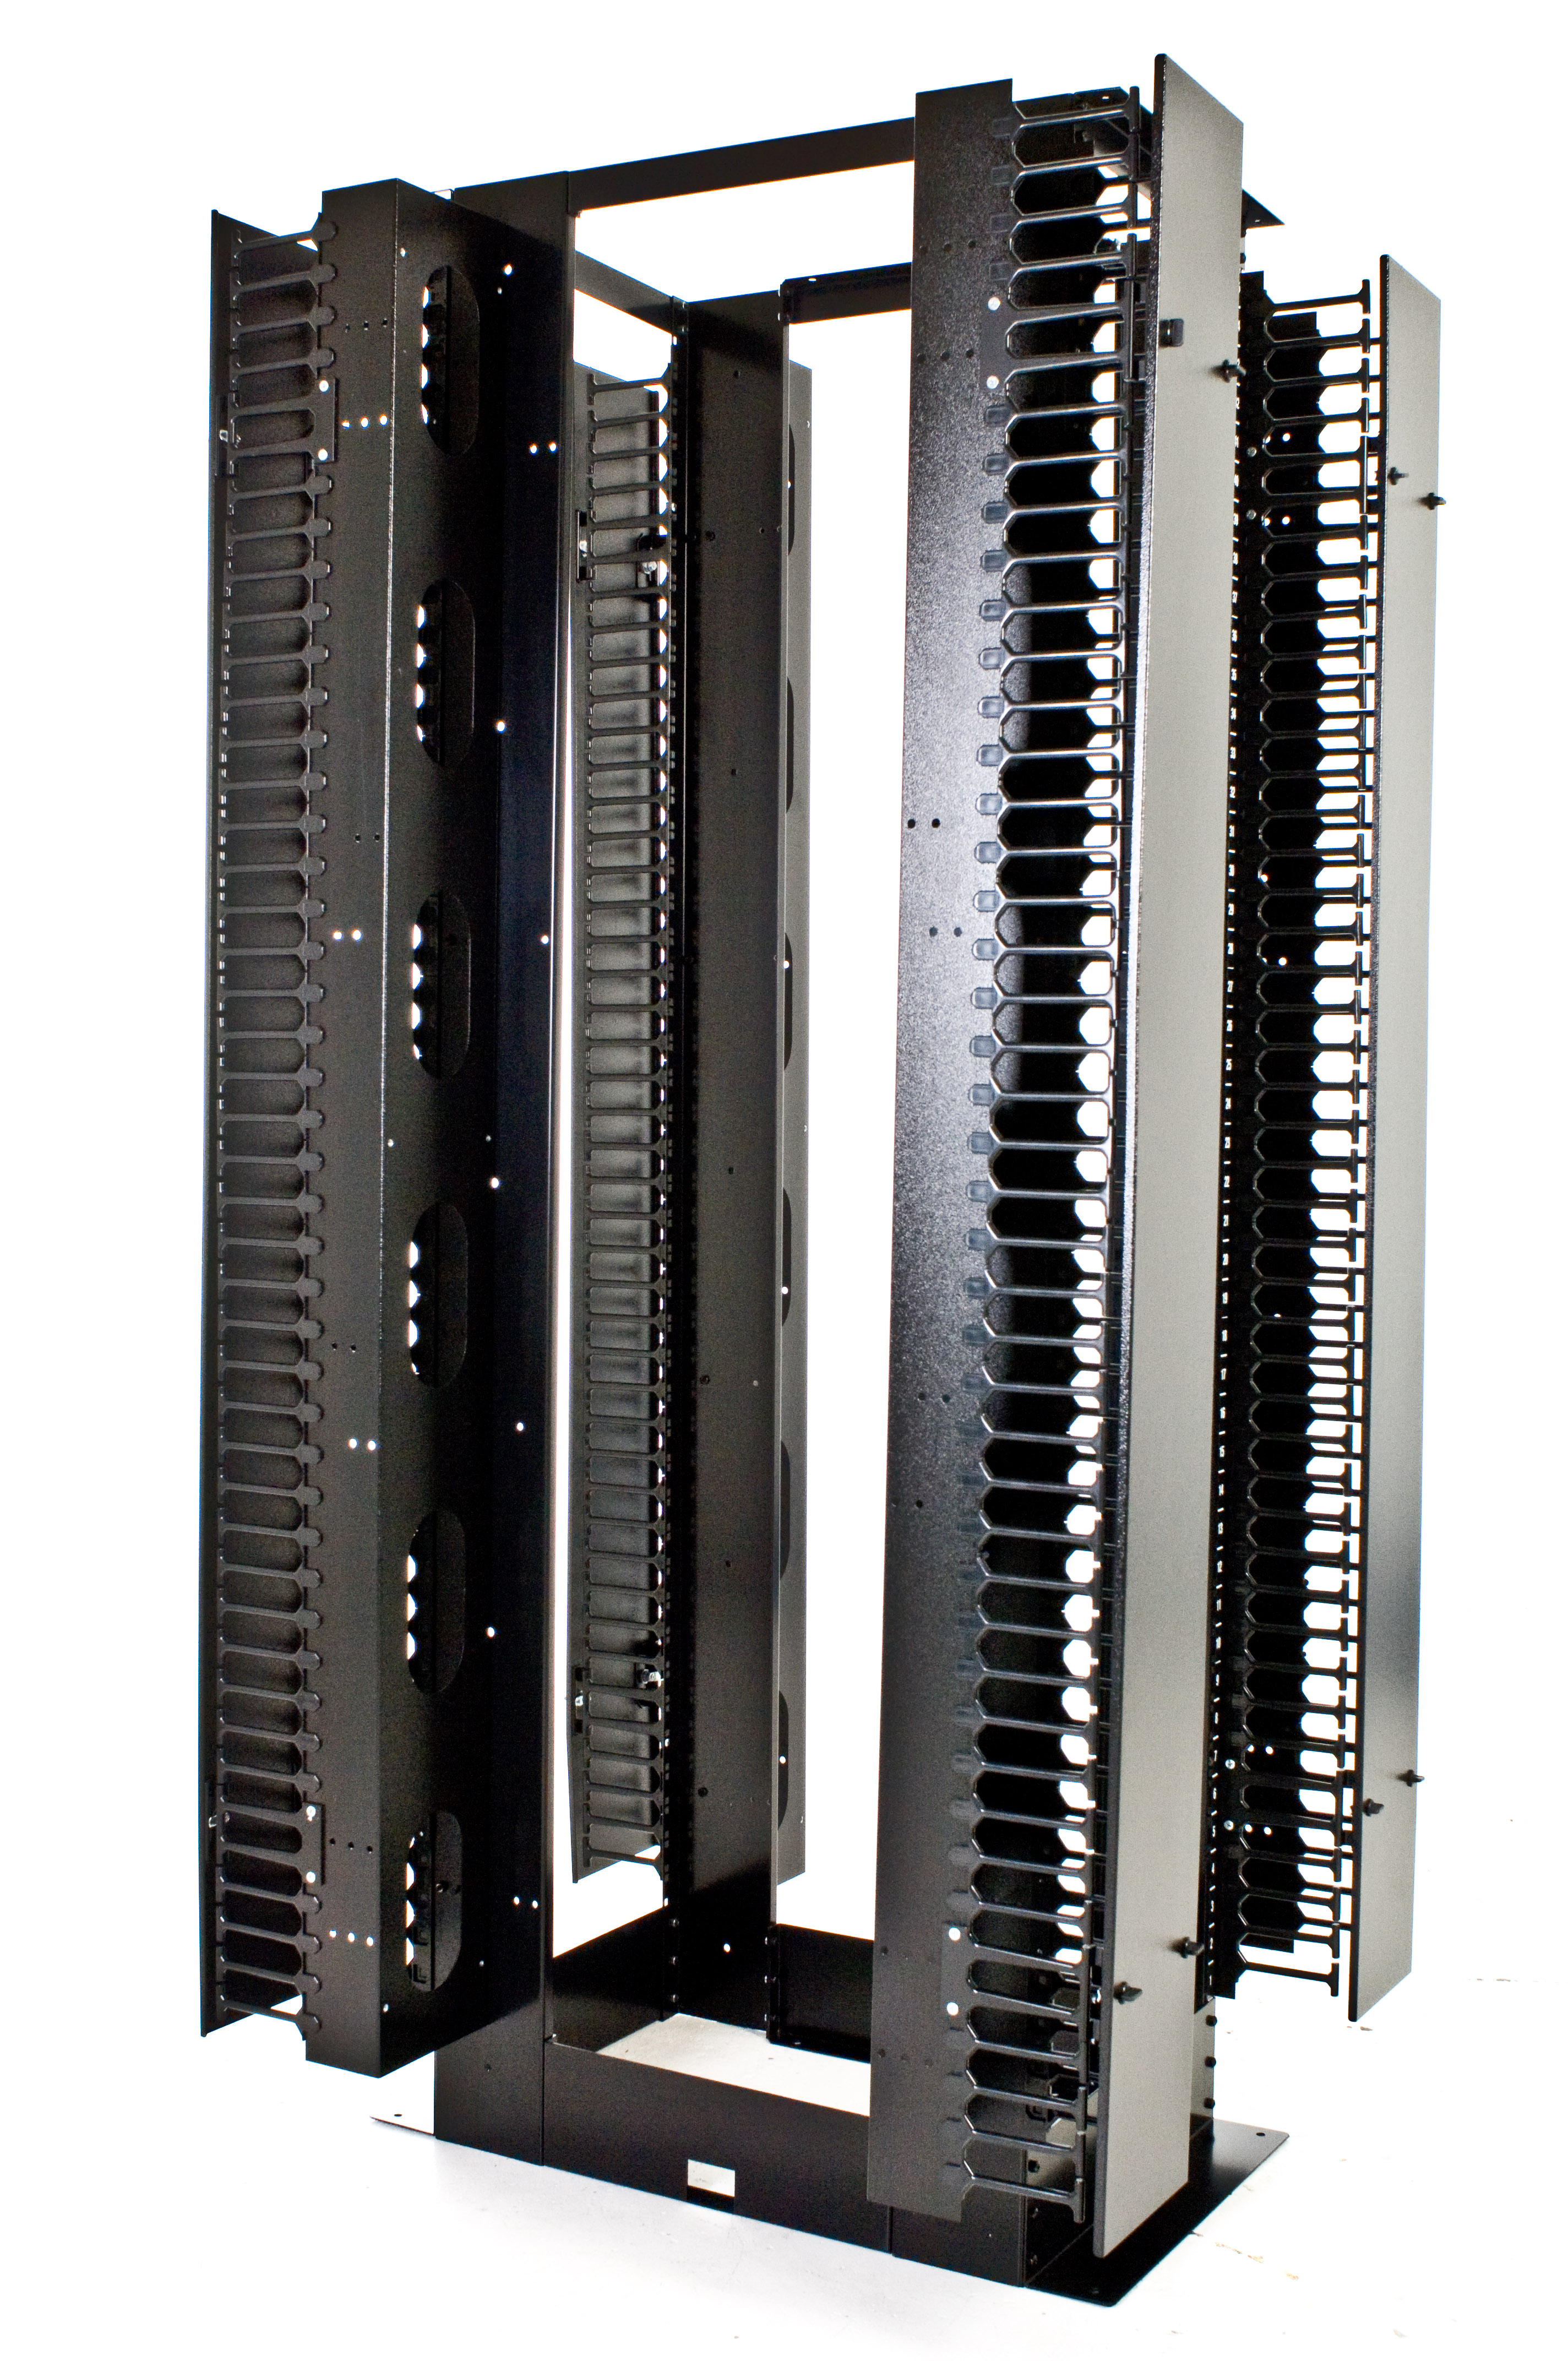 This is a picutre of HDOF Open Frame cabling cabinet